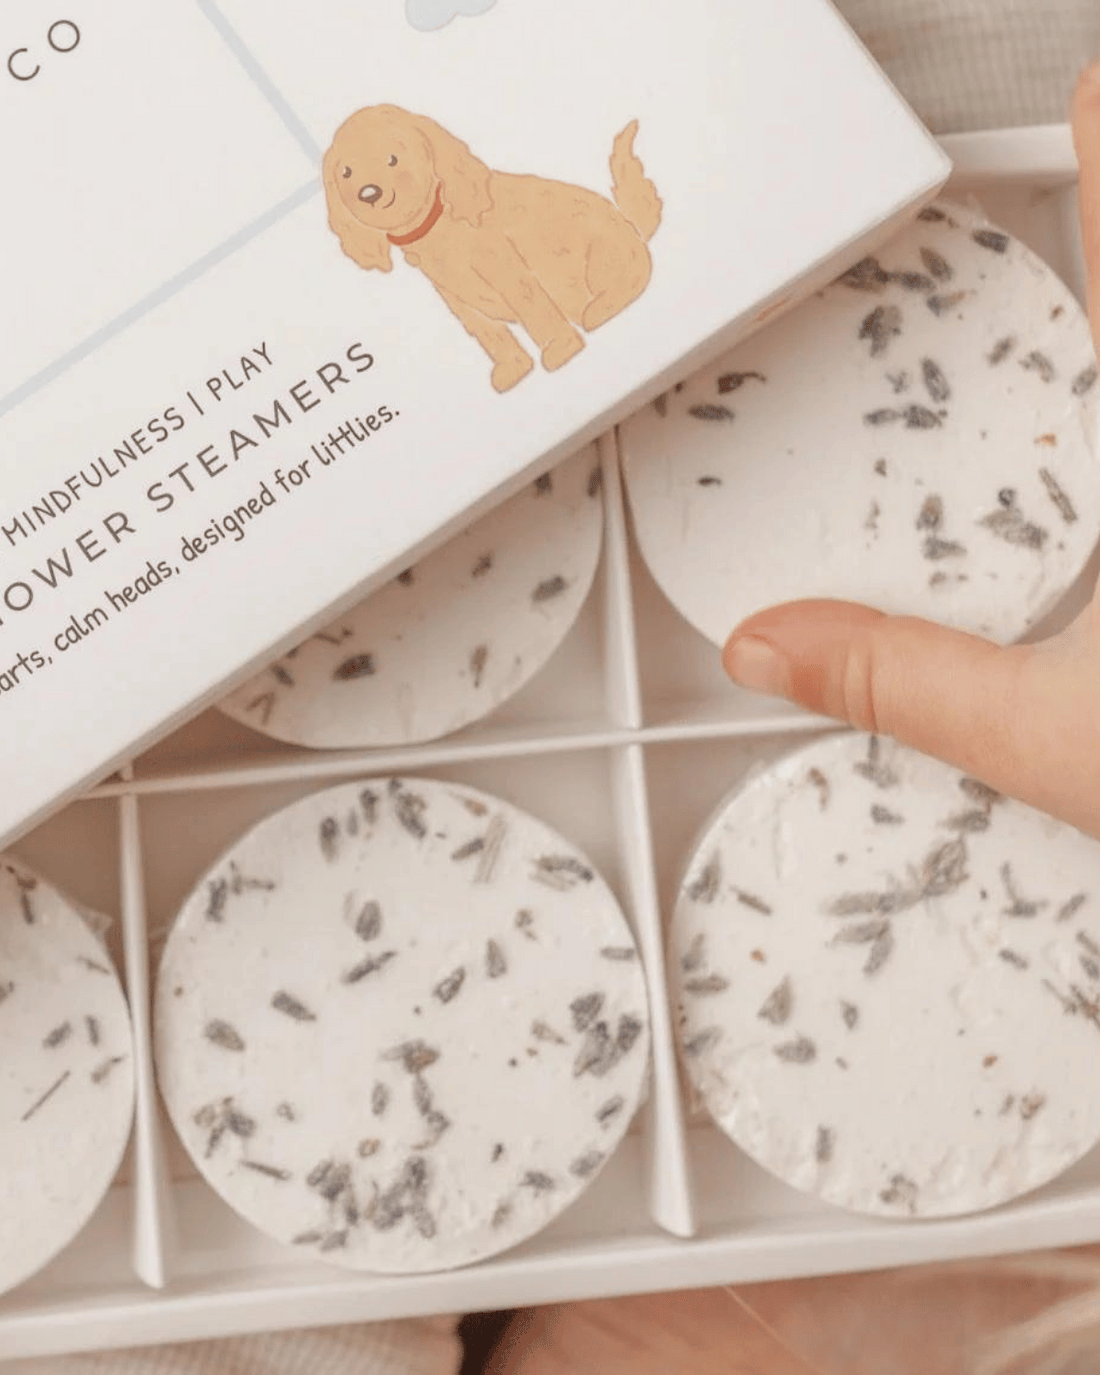 Kids Shower Steamers by Mindful &amp; Co